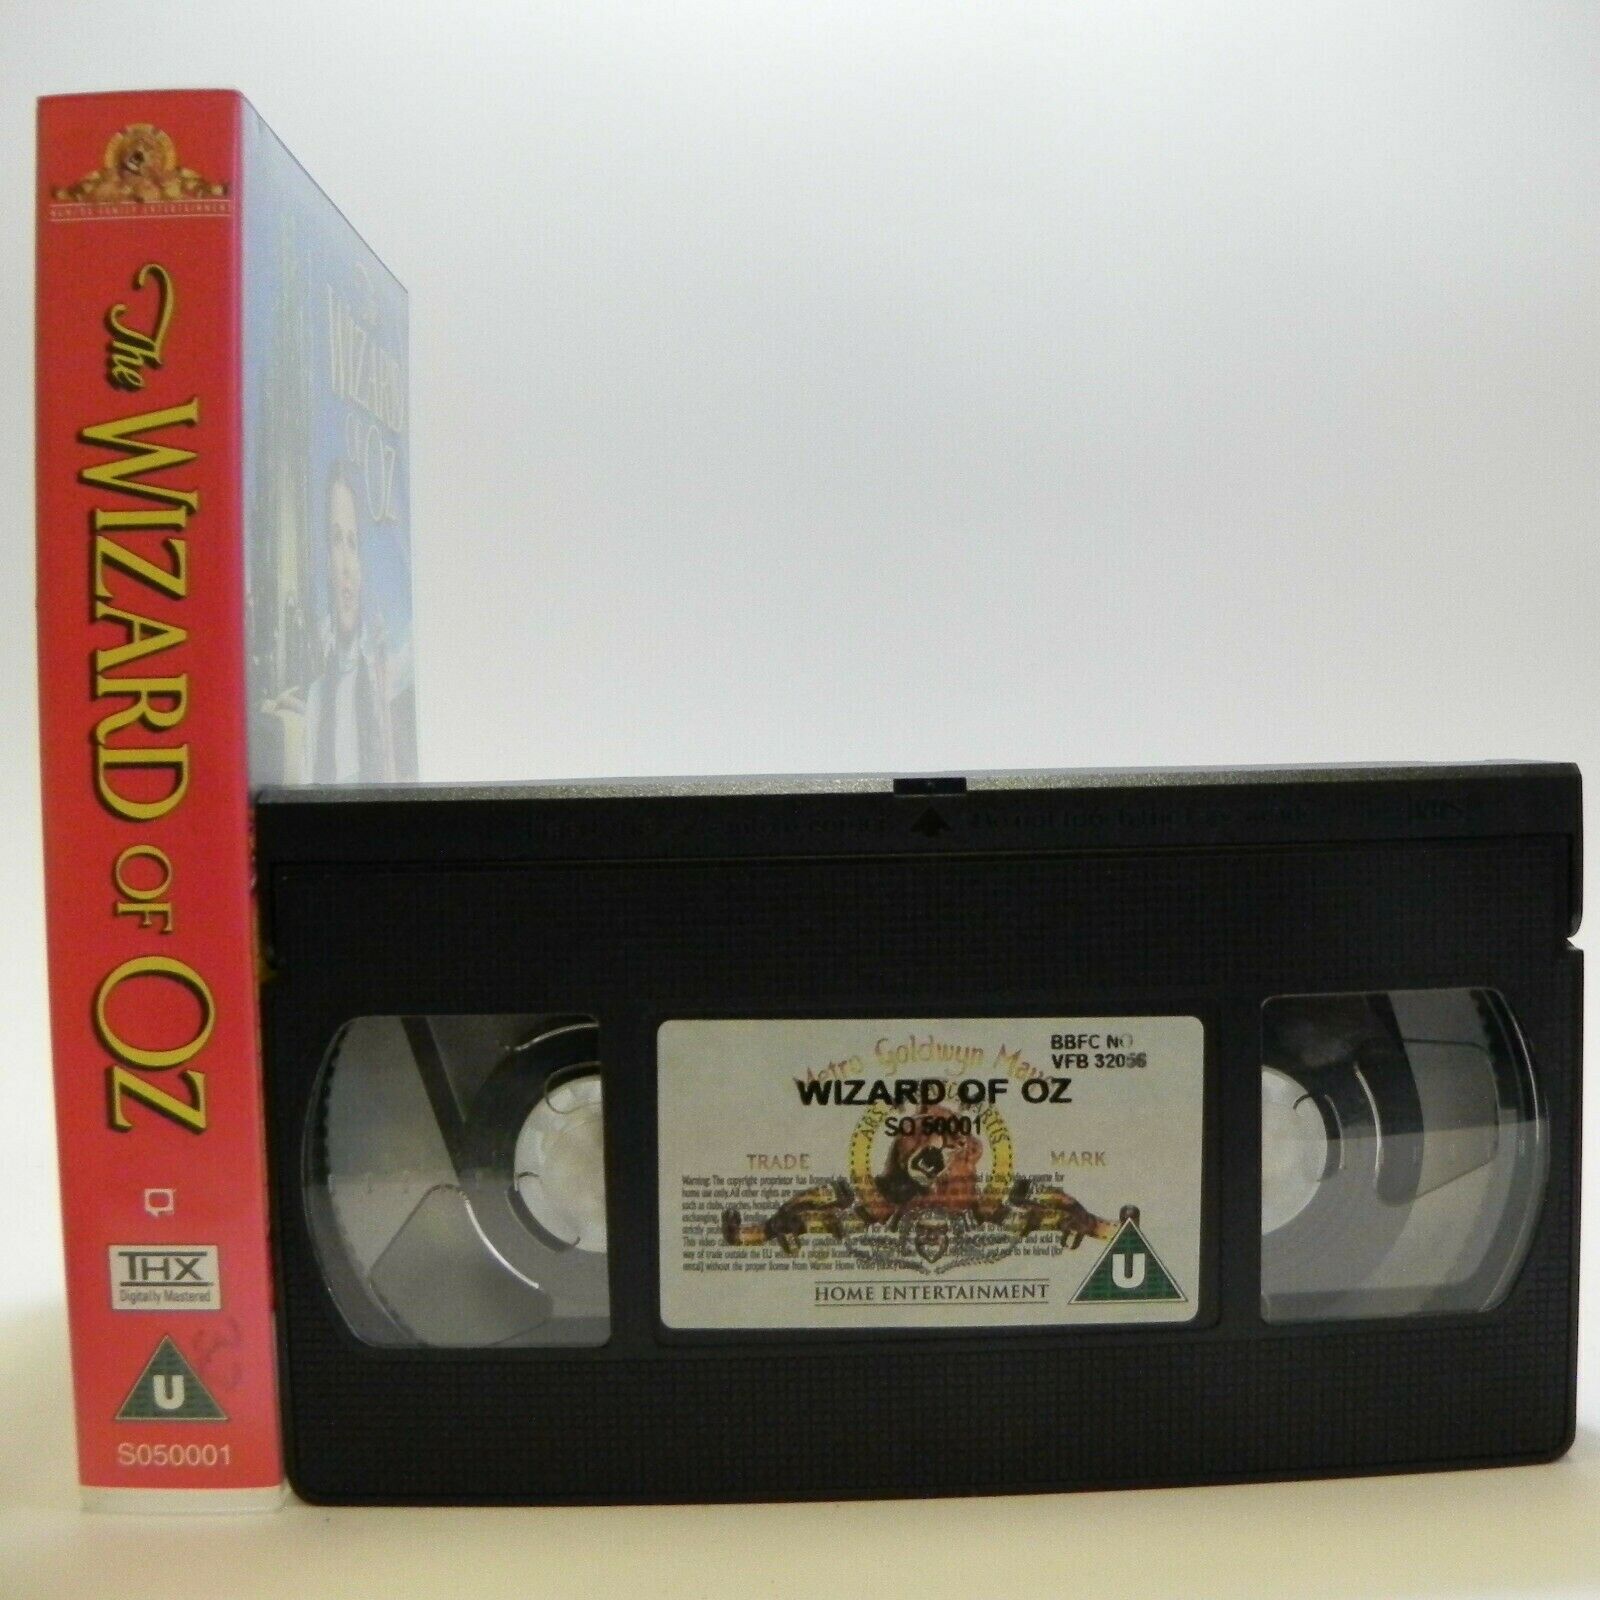 The Wizard Of Oz - MGM Digitally Remastered - Children's Fantasy Adventure - VHS-